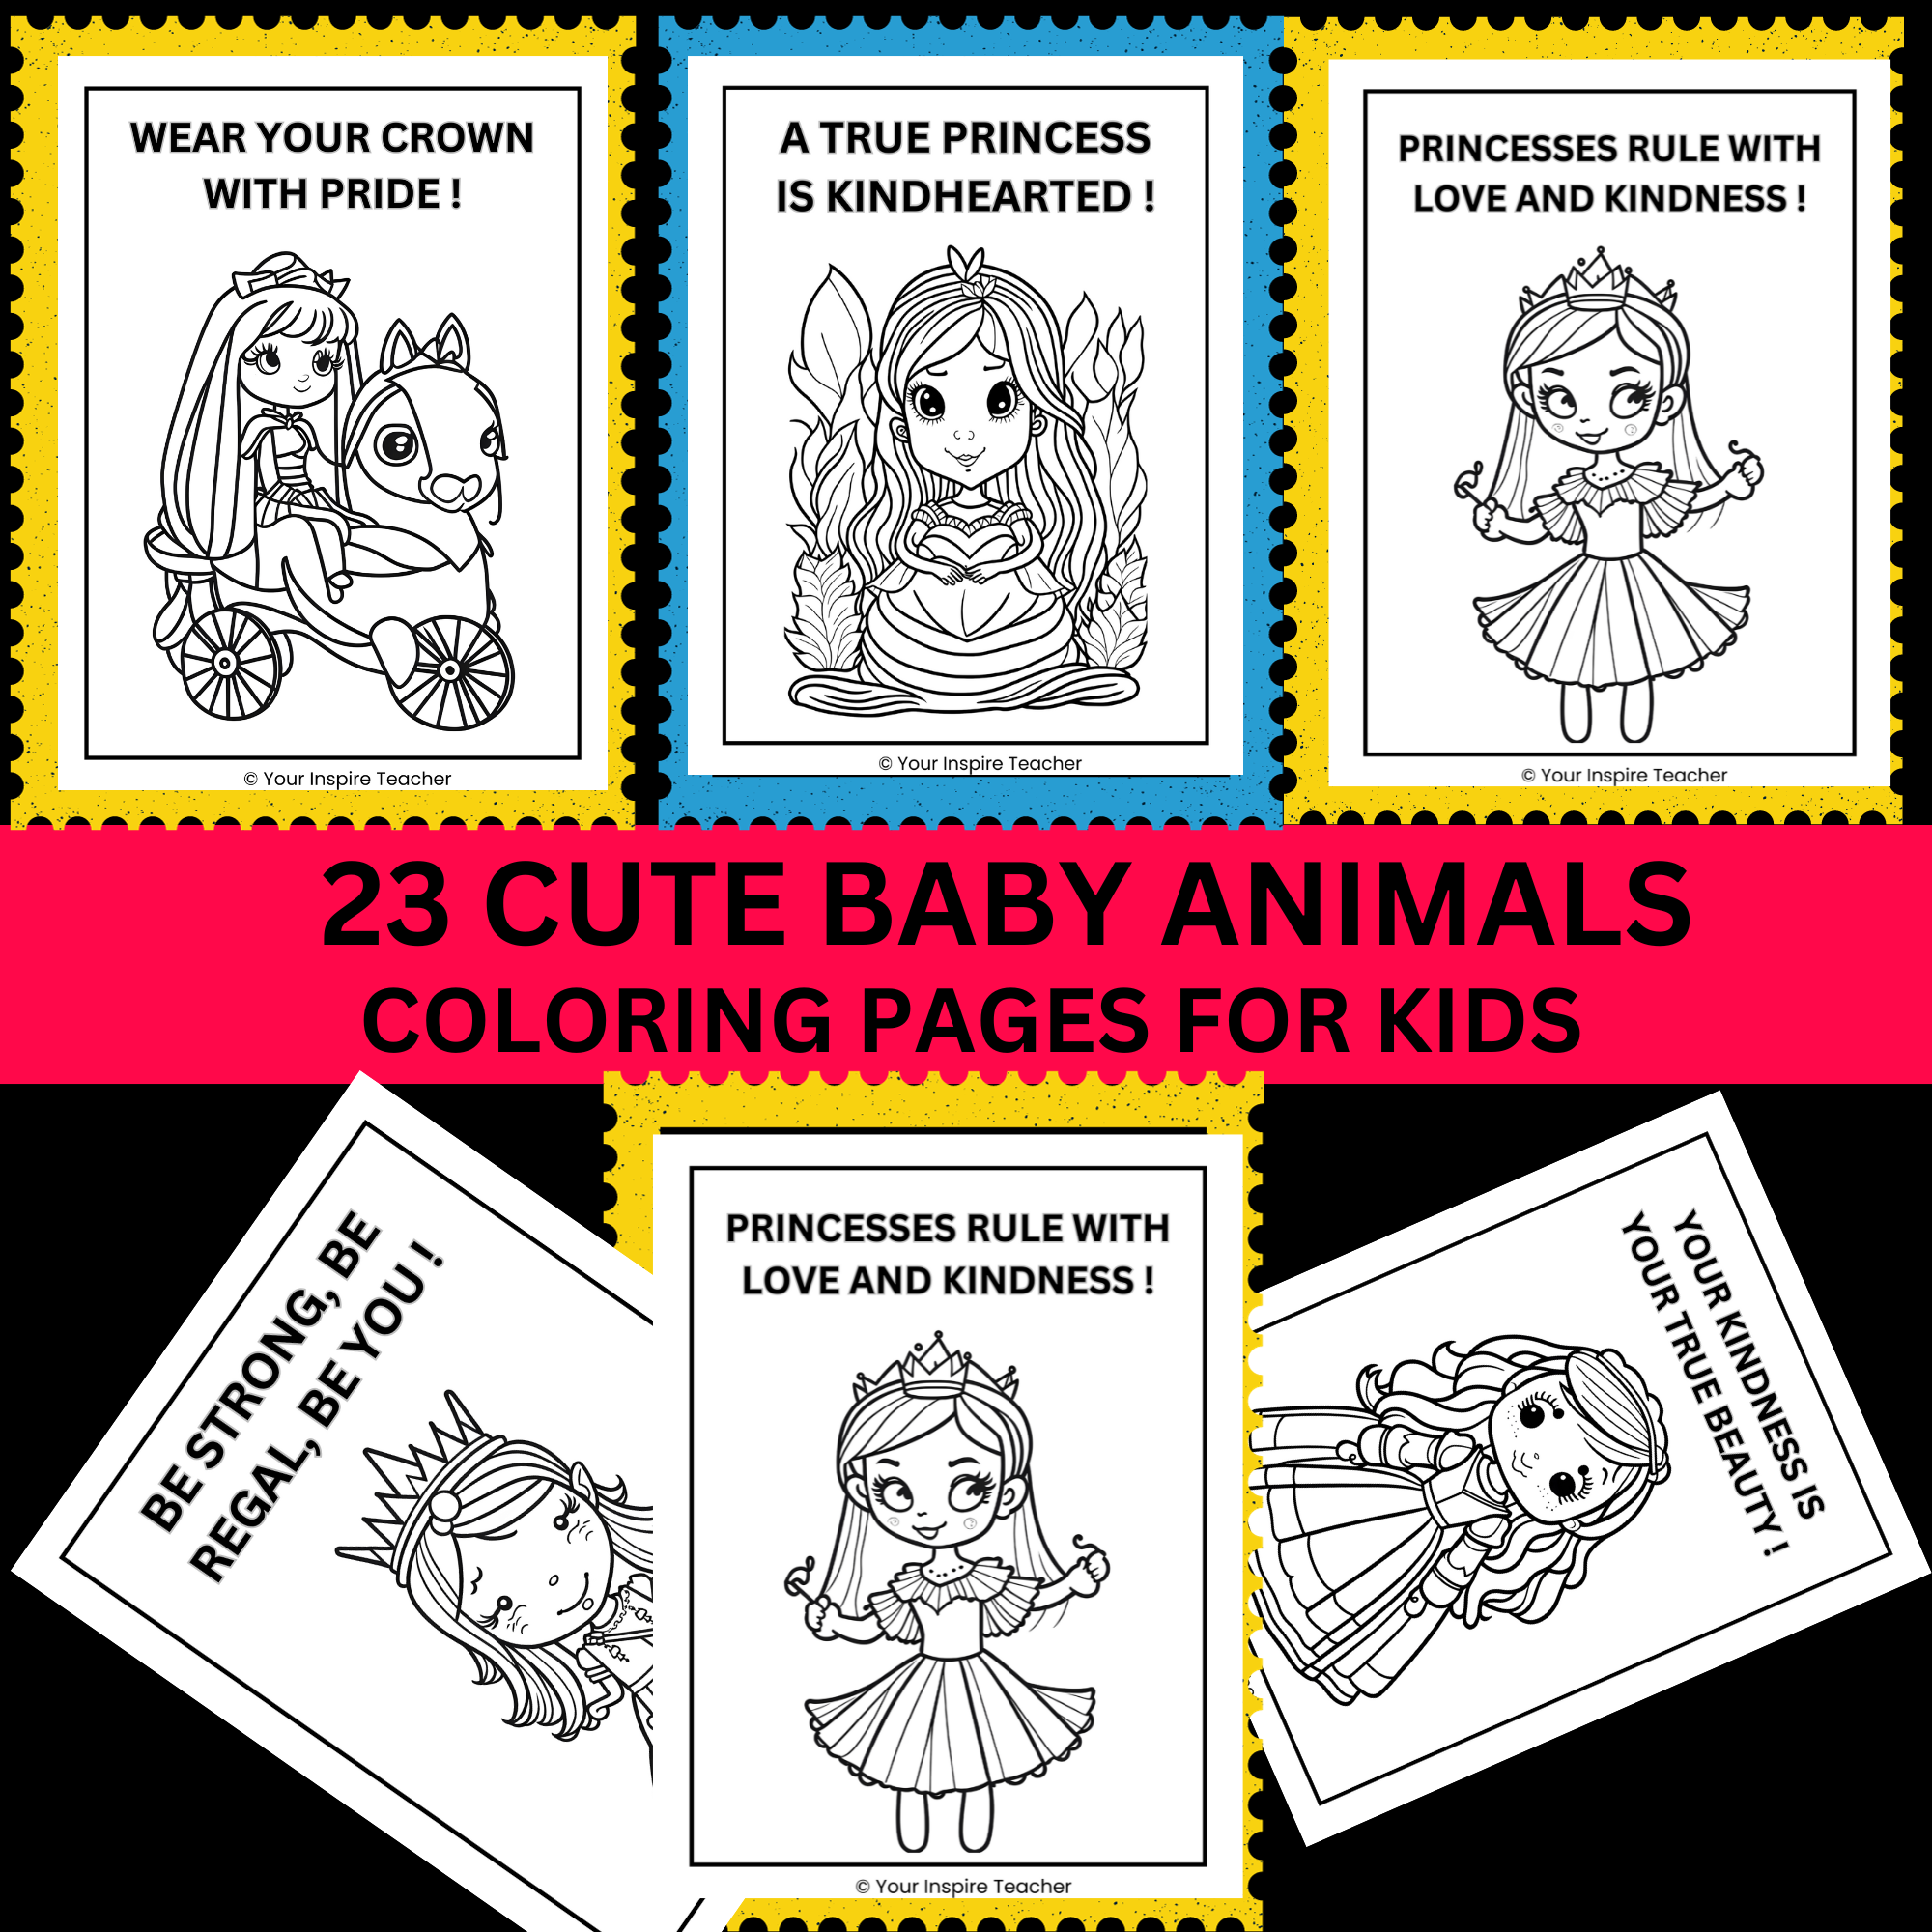 Sweet and cute princess coloring pages with motivational quotes